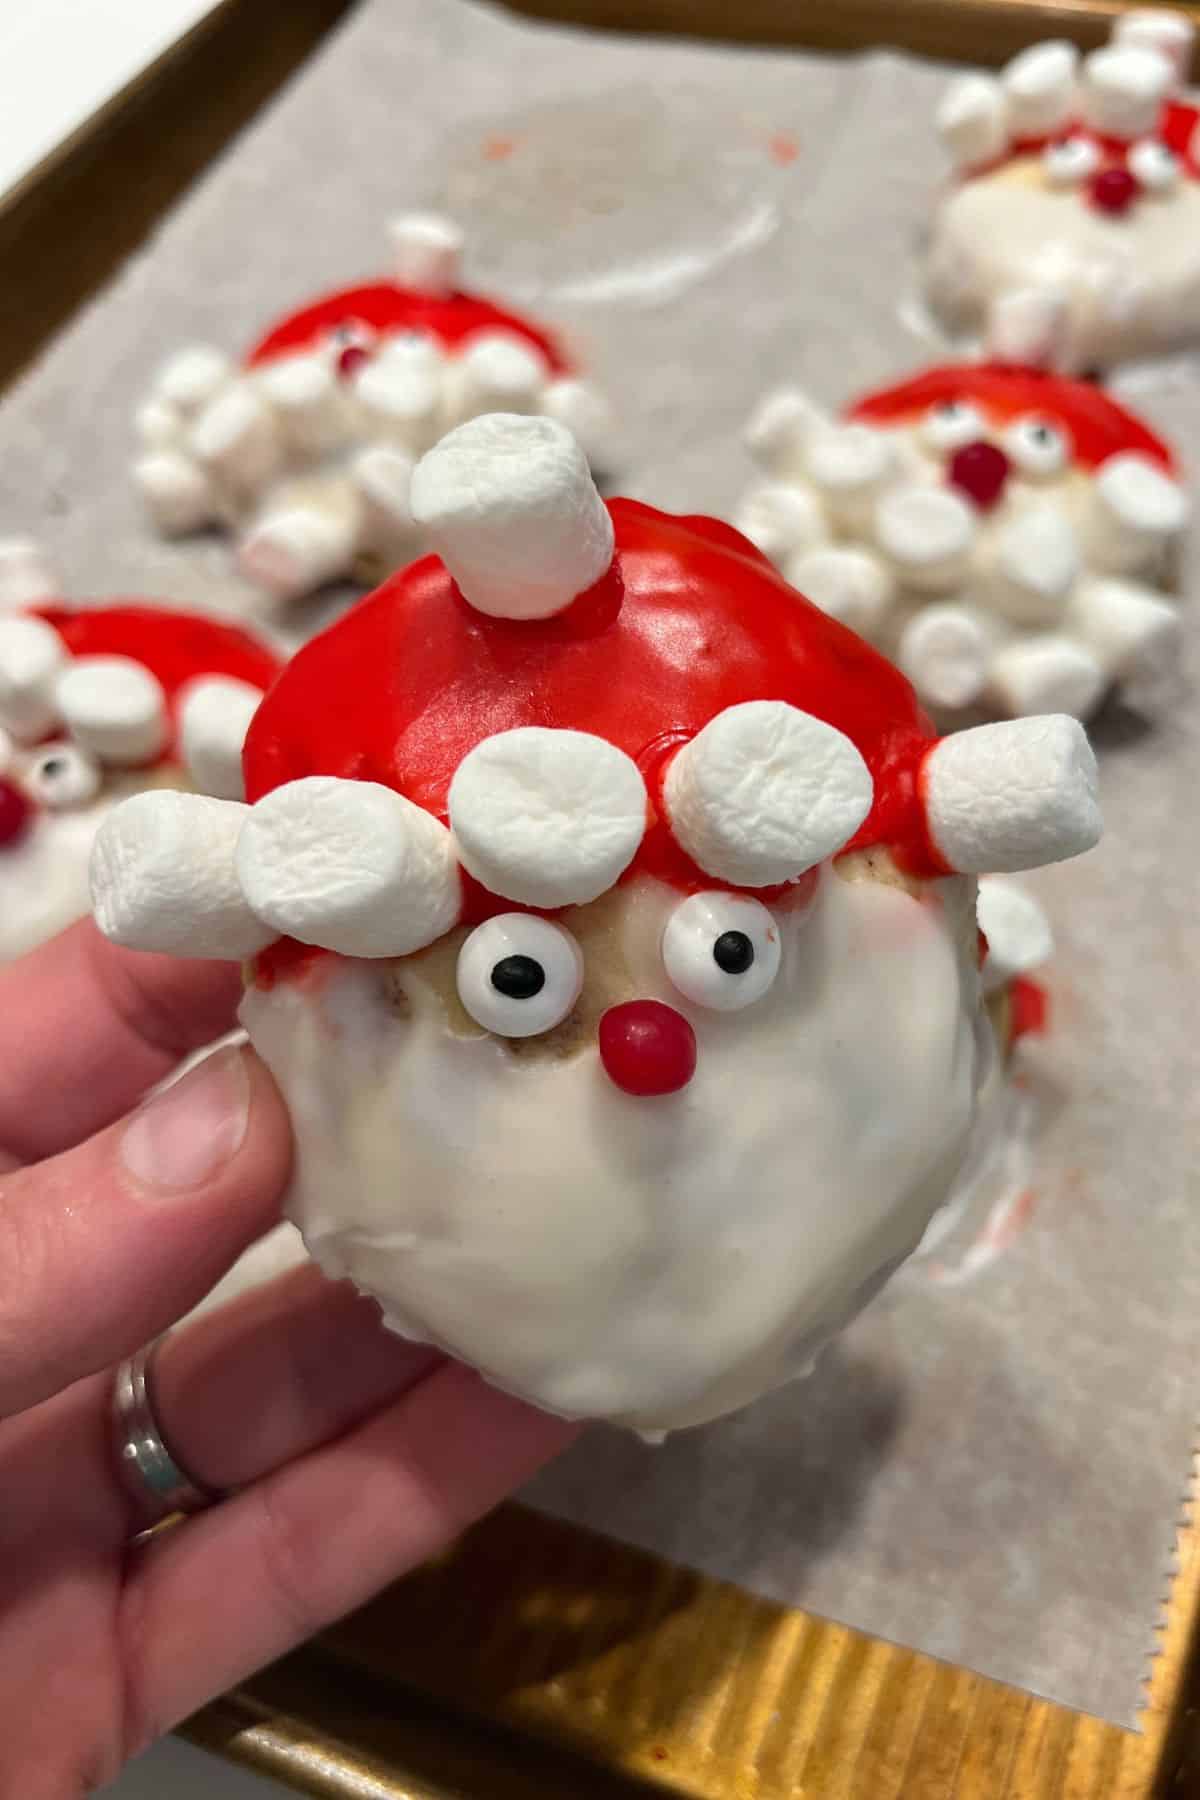 hand holding santa cinnamon roll with marshmallows as the fur on the hat